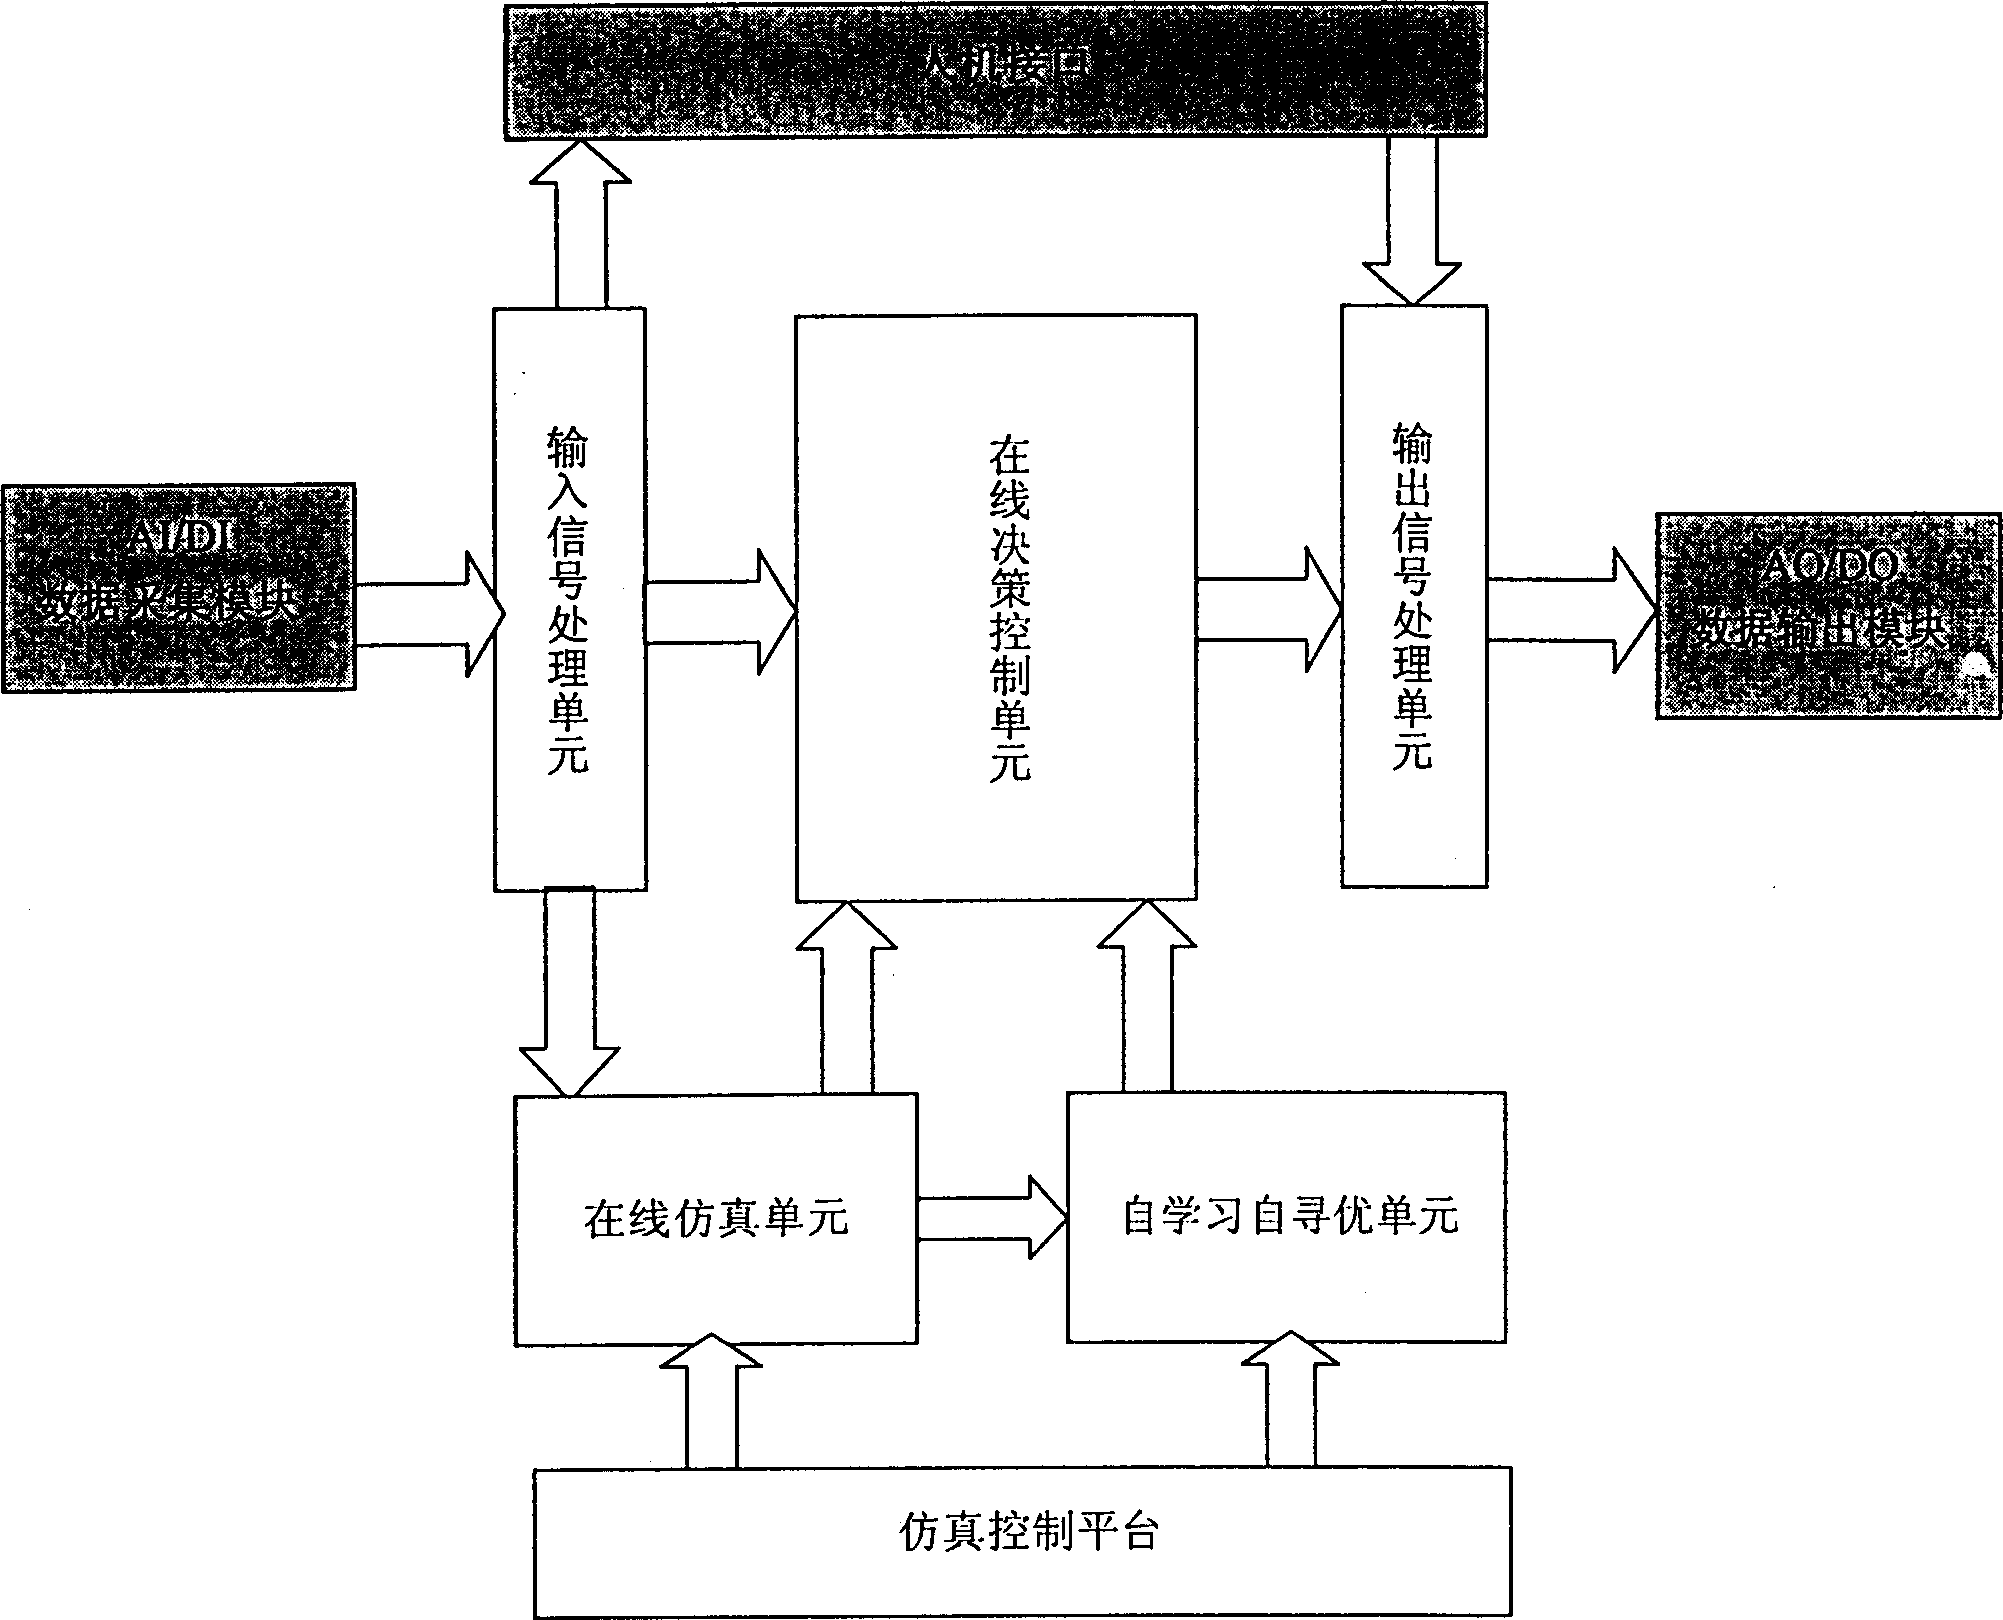 Controlling method and system for digital steel-ball coal grinder